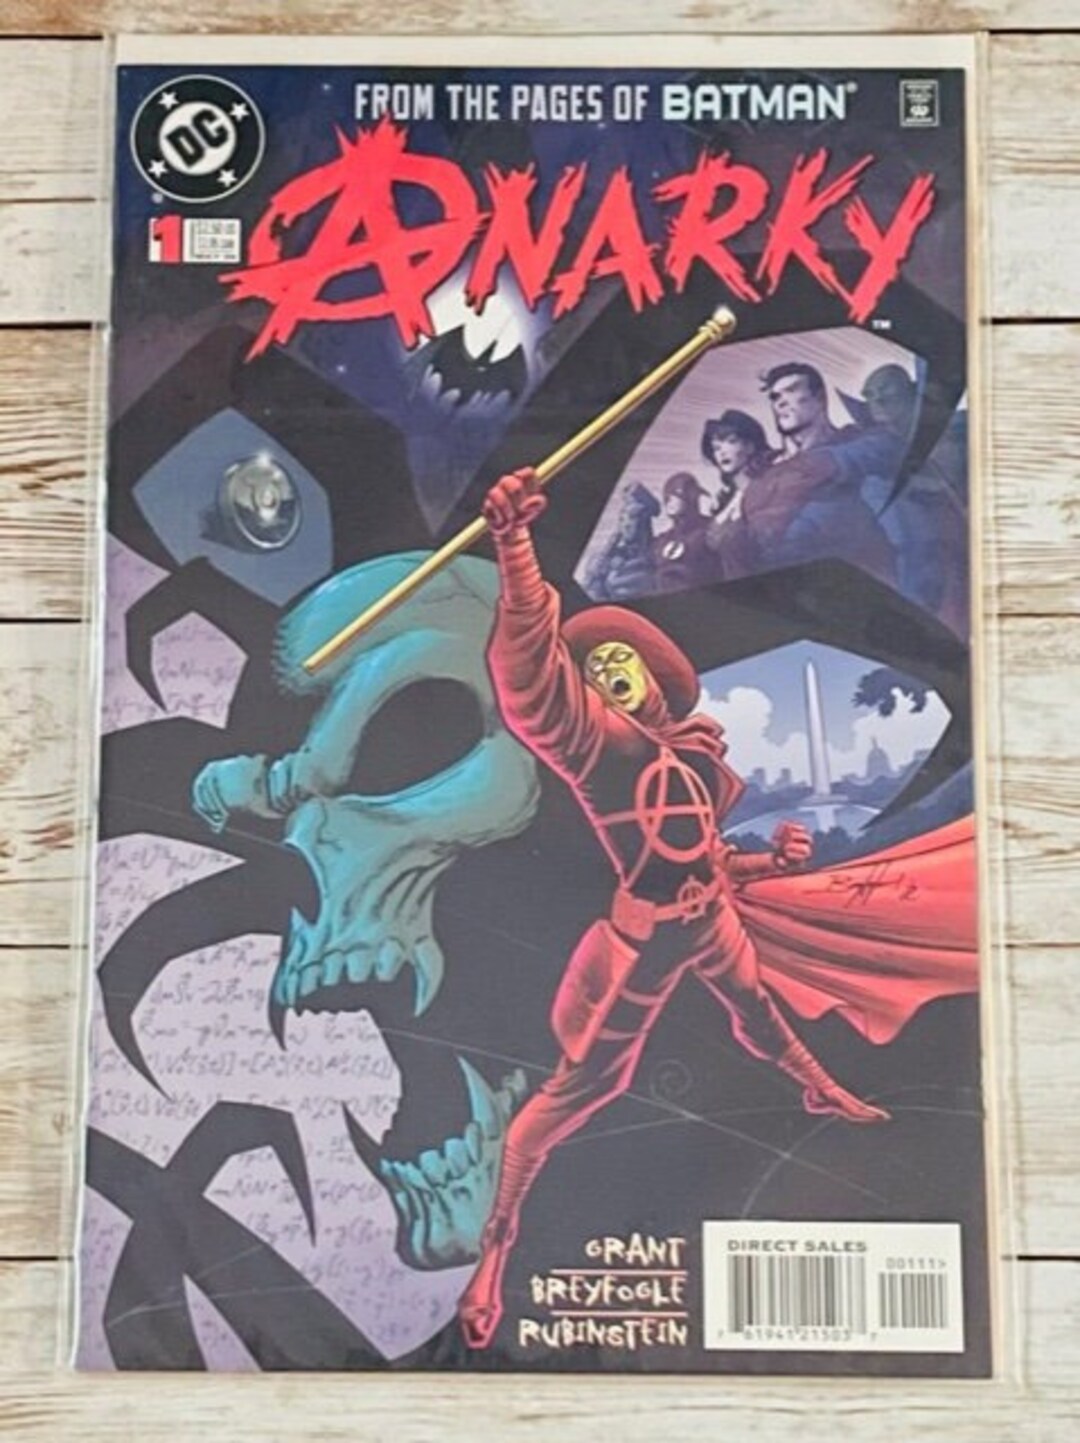 1999 DC Comics From the Pages of Batman Anarky 1 - Etsy